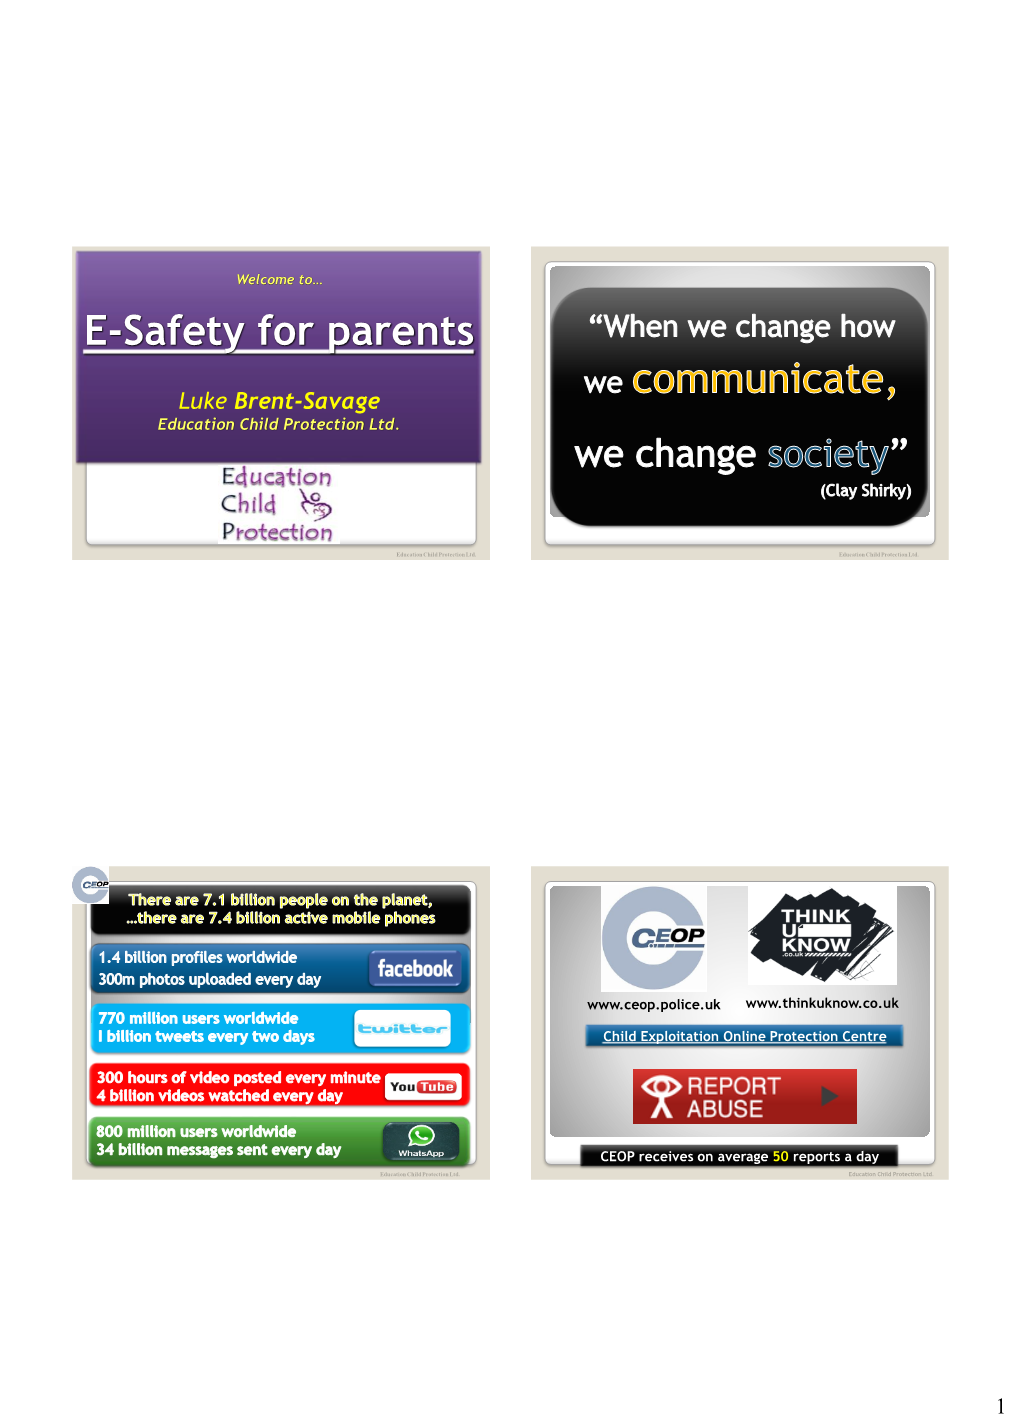 E-Safety for Parents